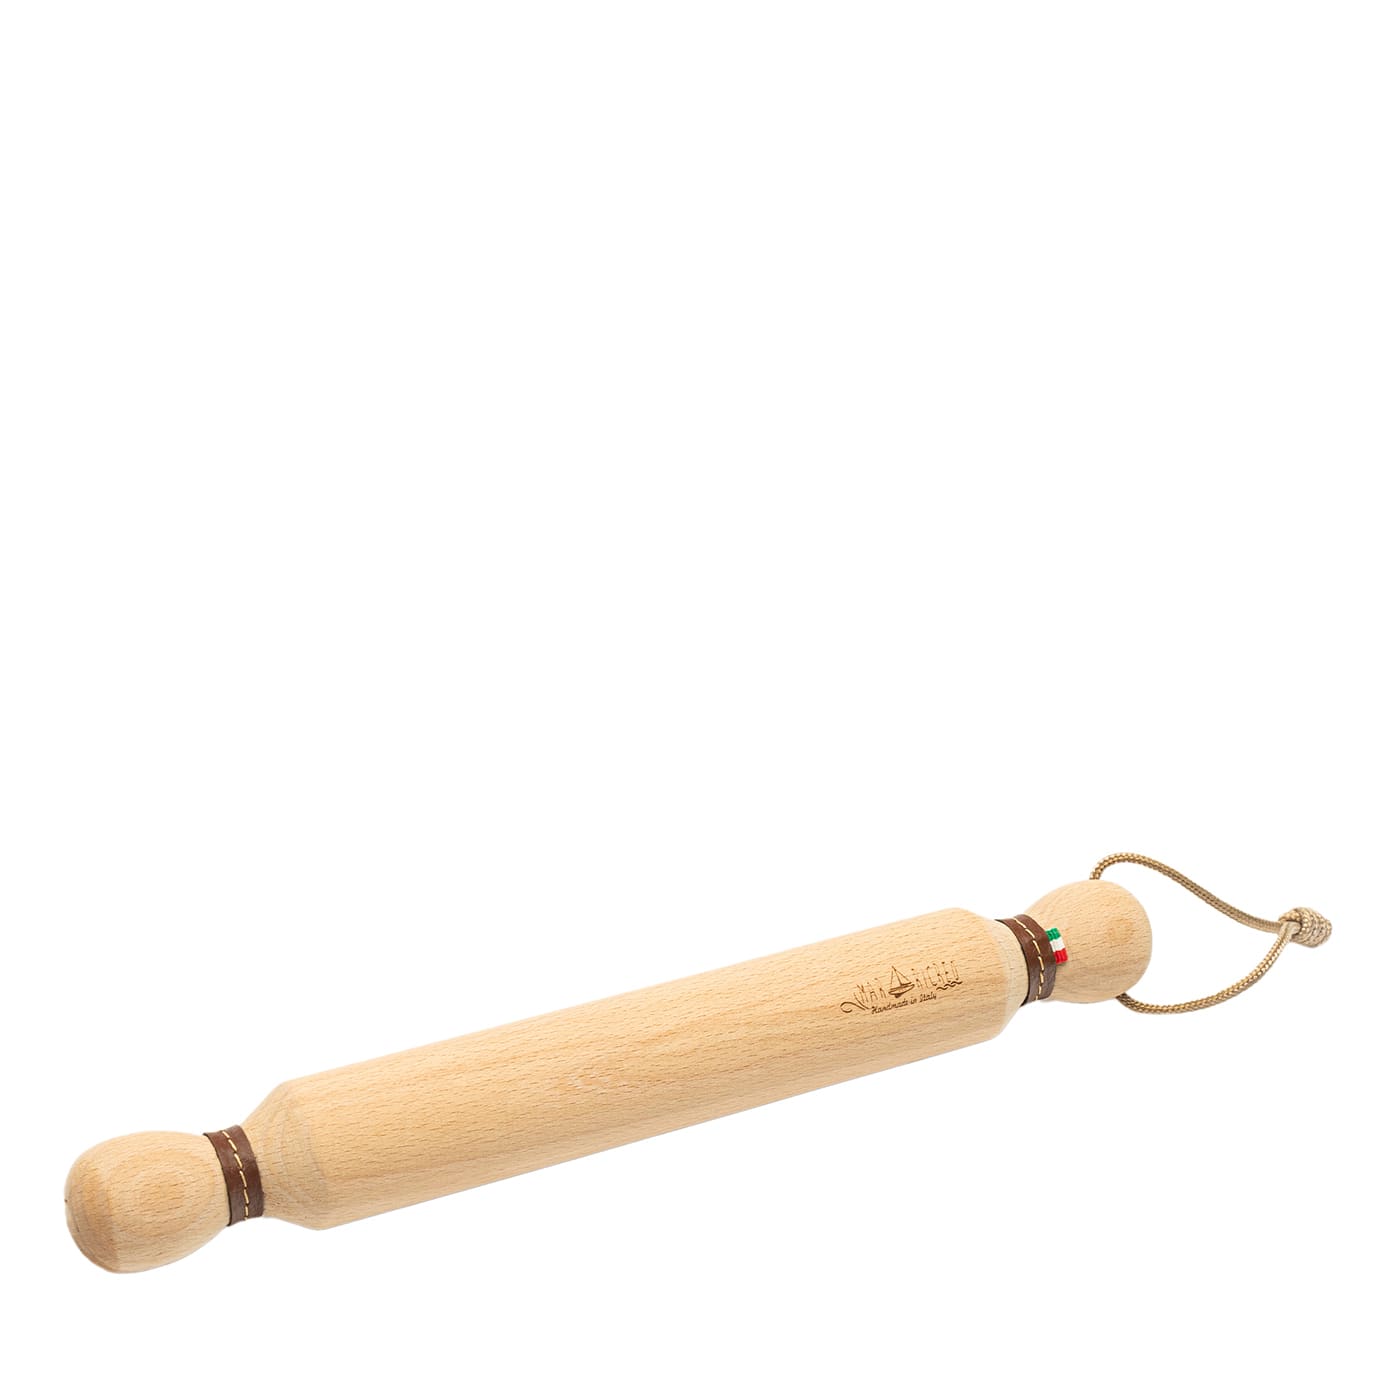 Rolling Pin with Beige Eco-Leather Inserts - Marricreo